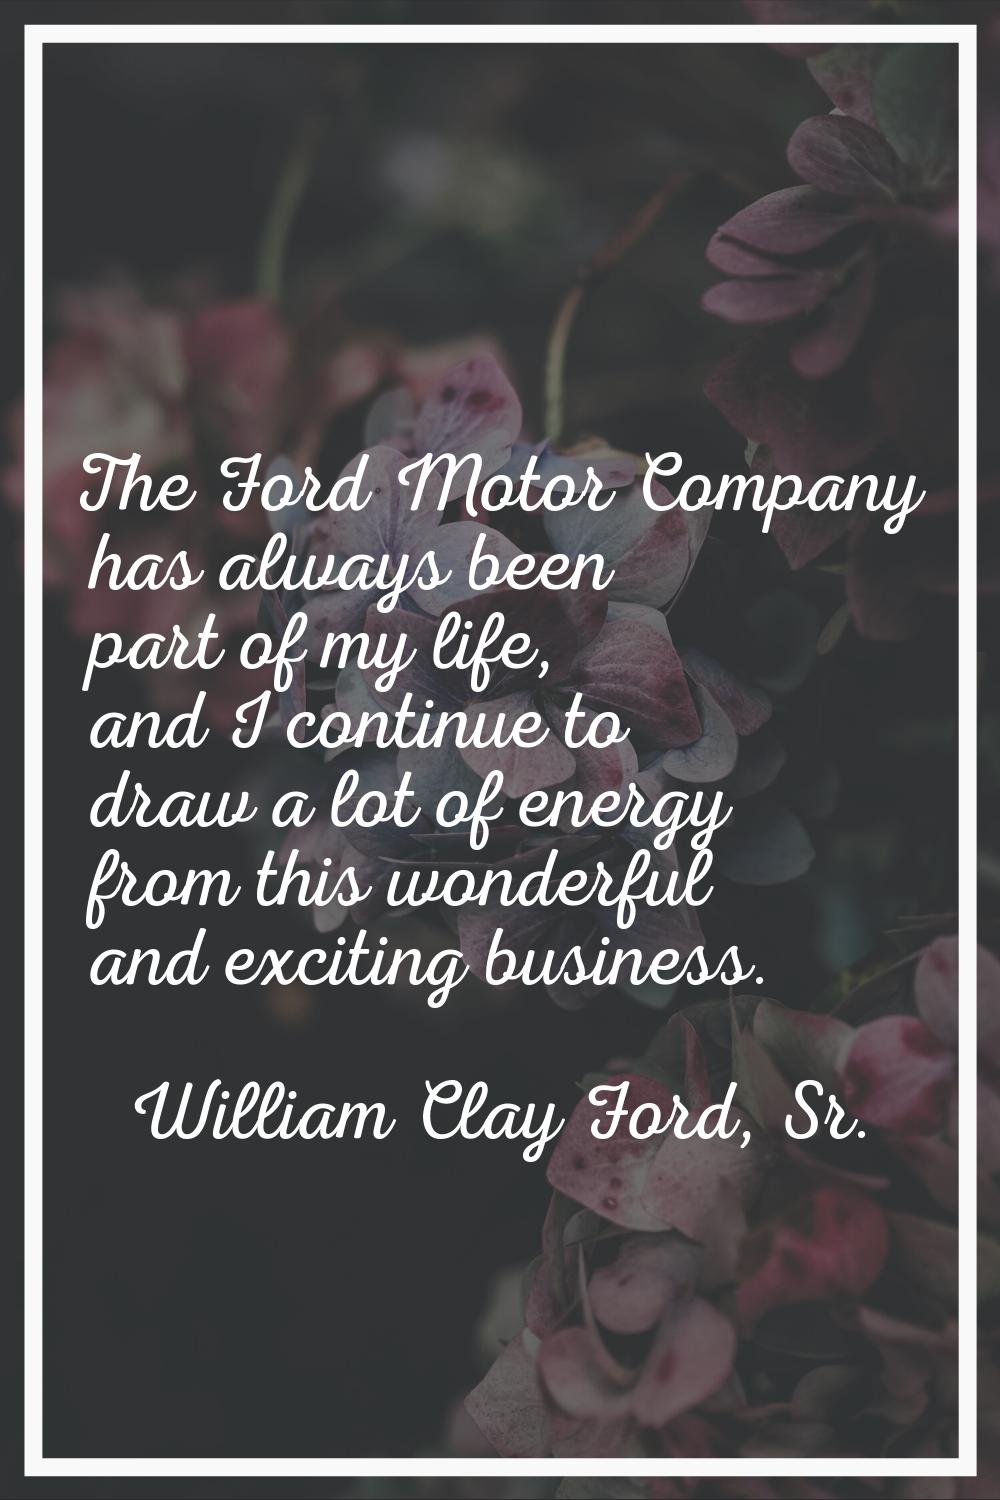 The Ford Motor Company has always been part of my life, and I continue to draw a lot of energy from